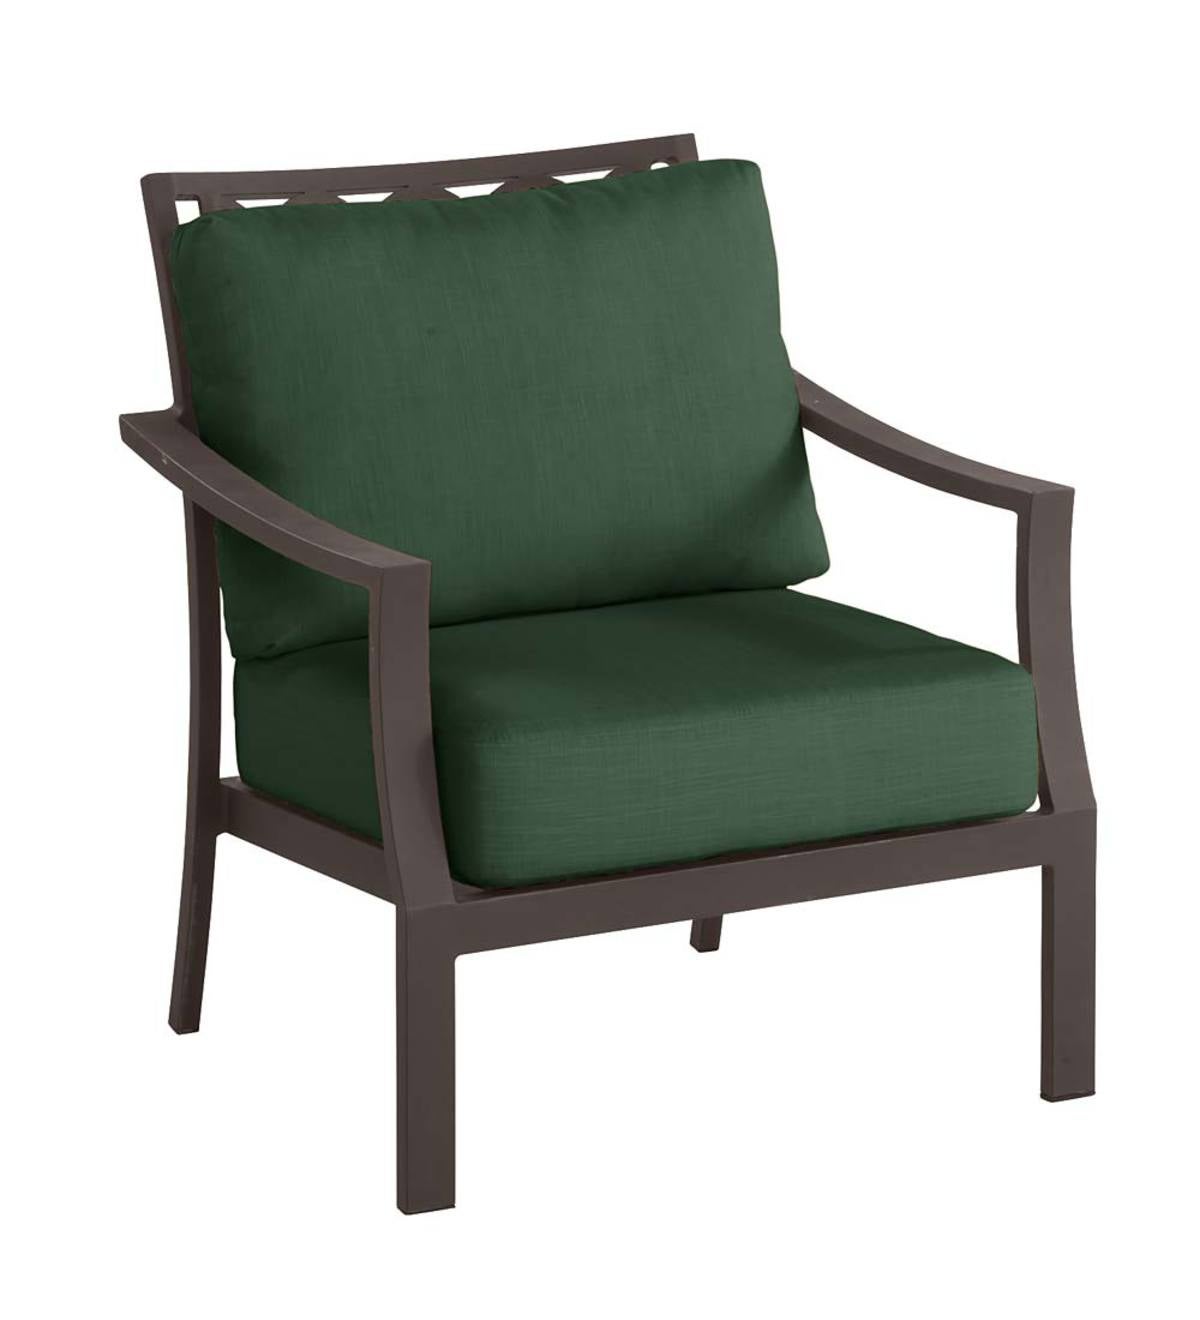 Topsail Deep Seating Chair with Cushions